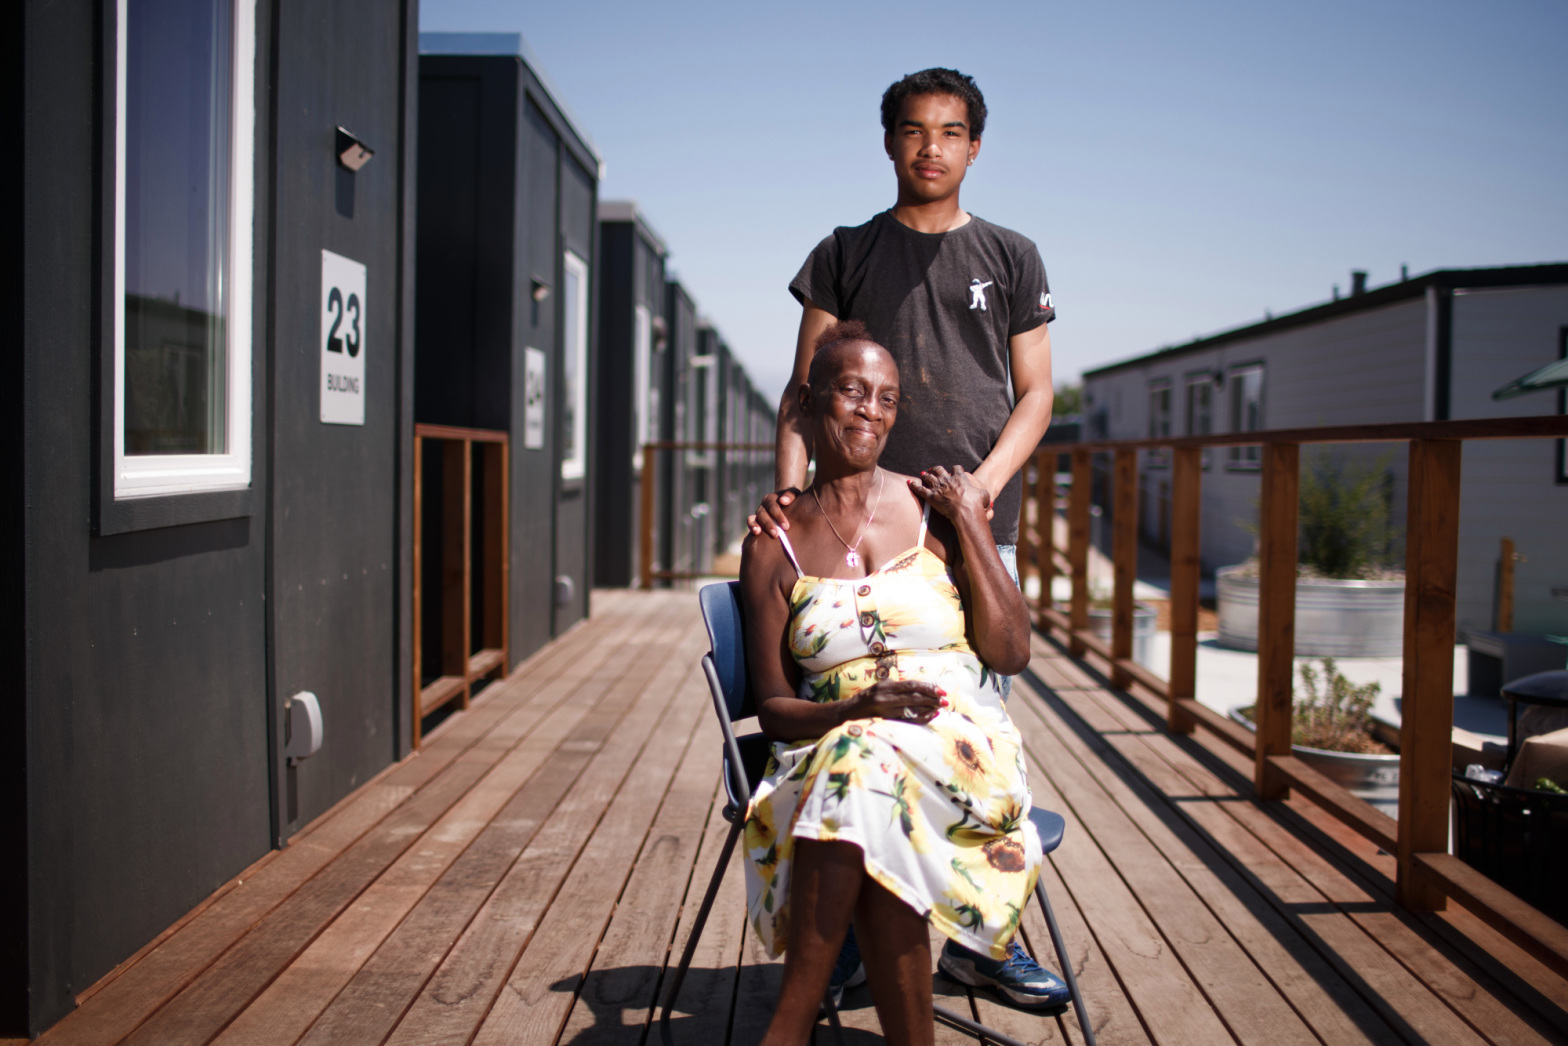 Unhoused San Jose families find new home in community of recycled shipping containers